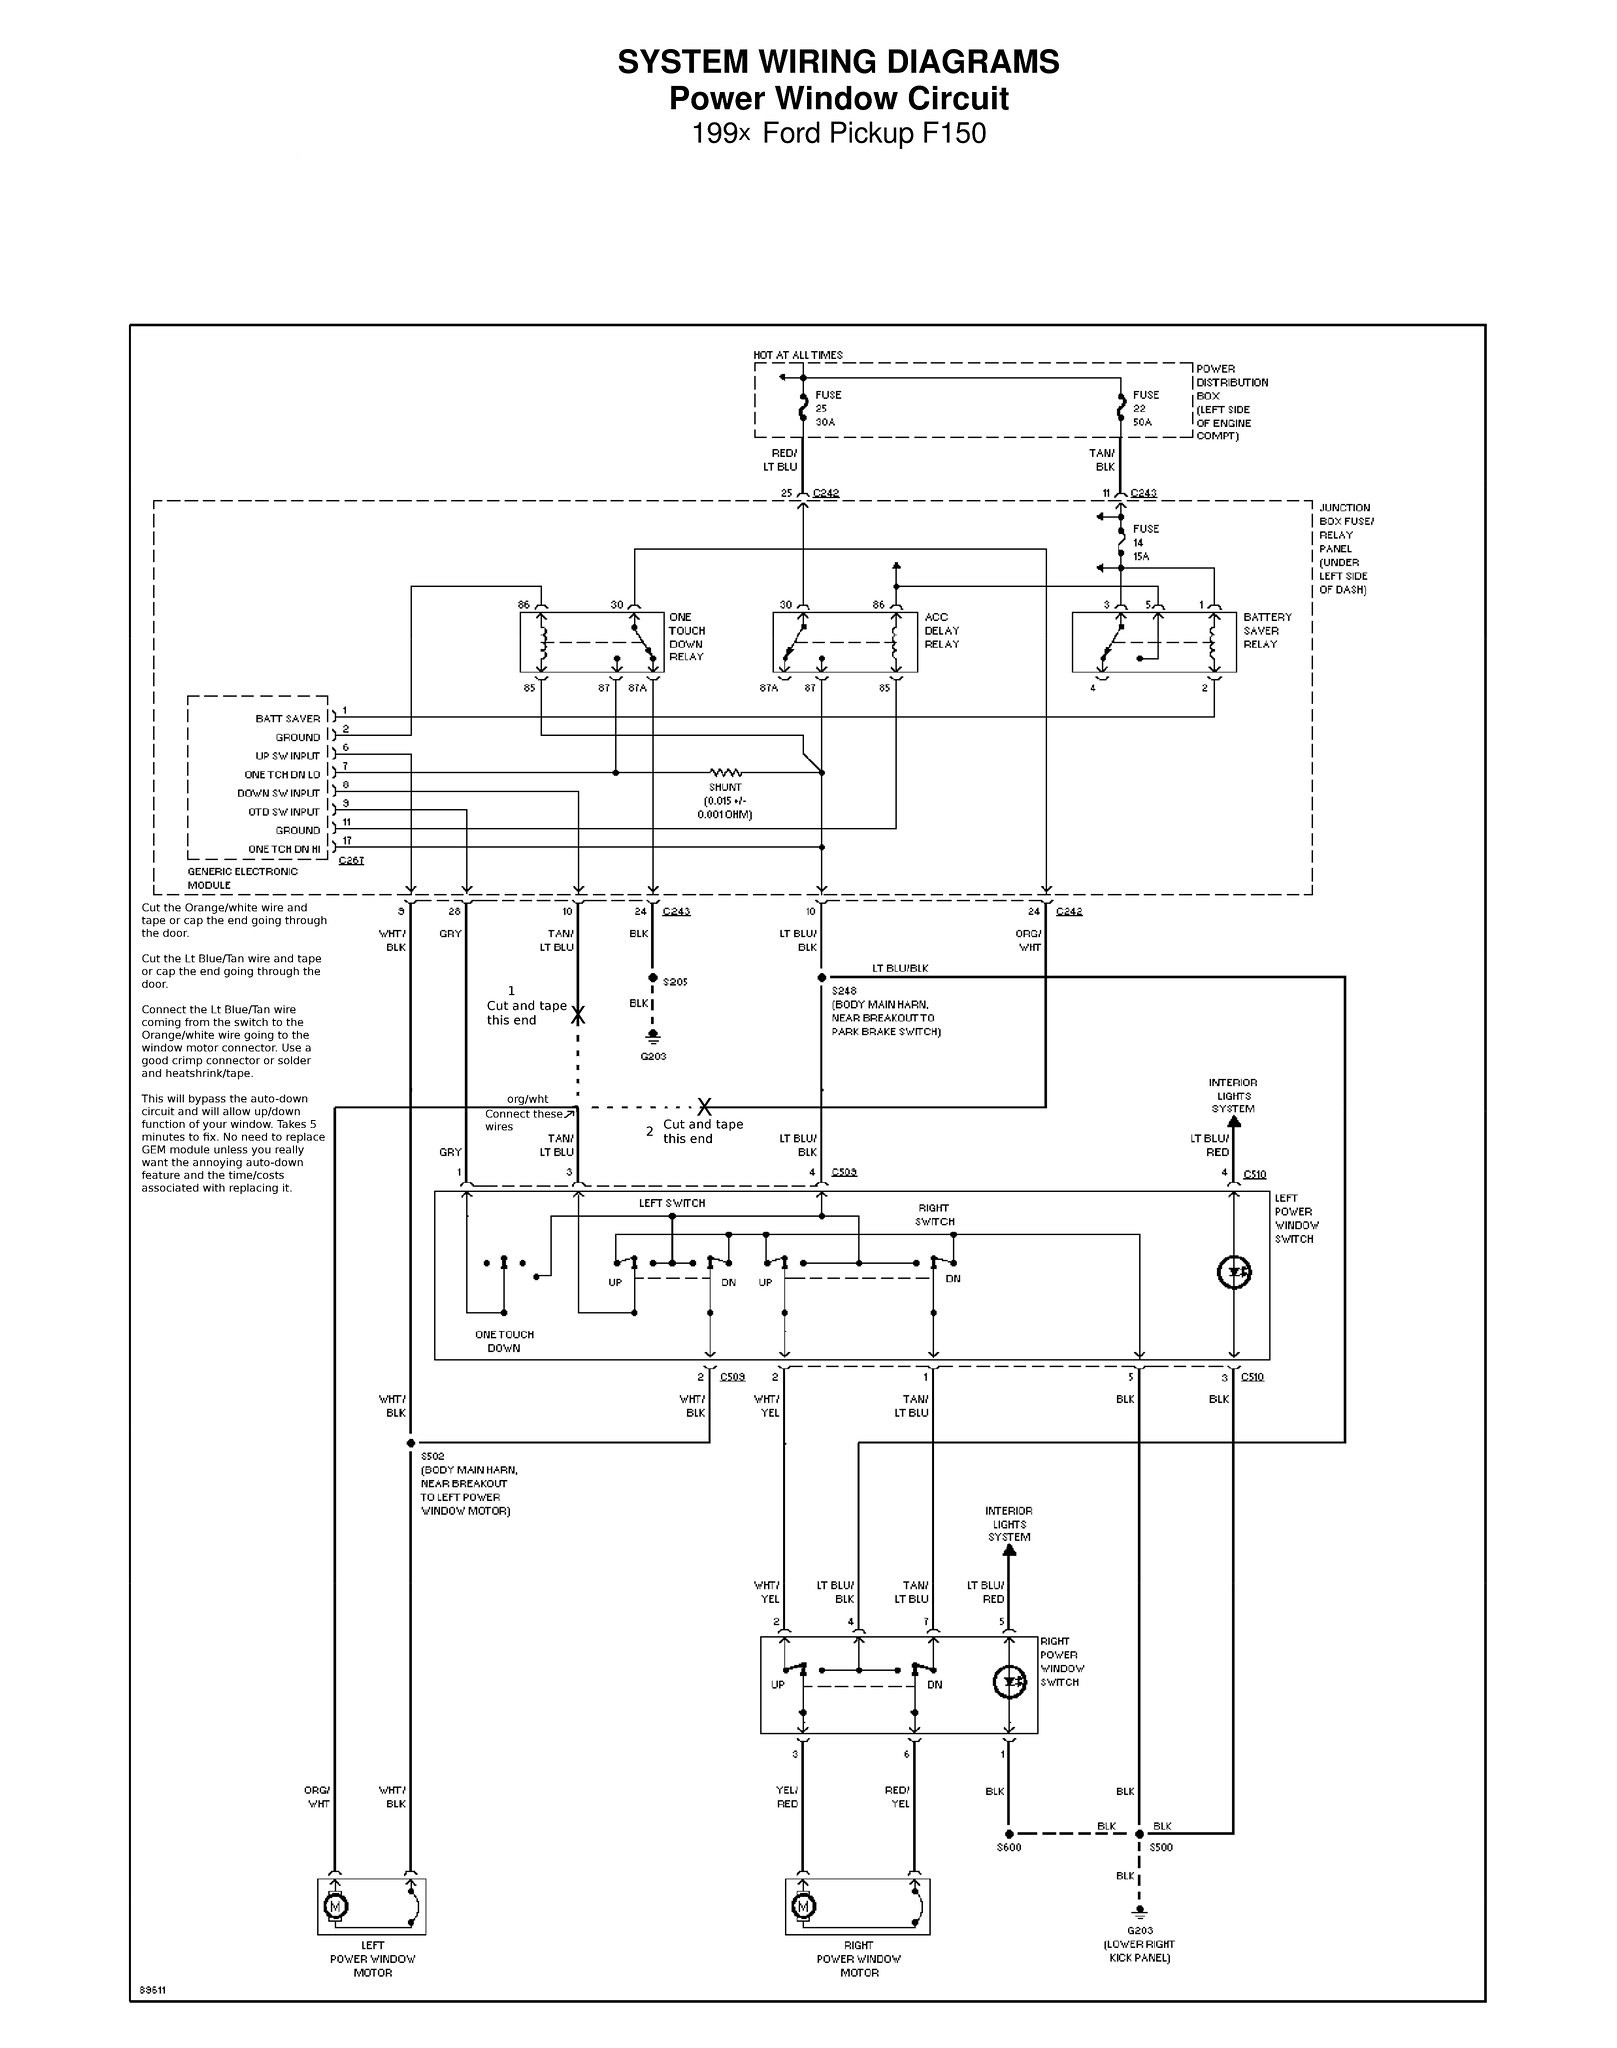 2000 ford F150 Ignition Wiring Diagram 2000 ford F 150 Truck Wiring Schematics 1943 Jeep Willys Of 2000 ford F150 Ignition Wiring Diagram